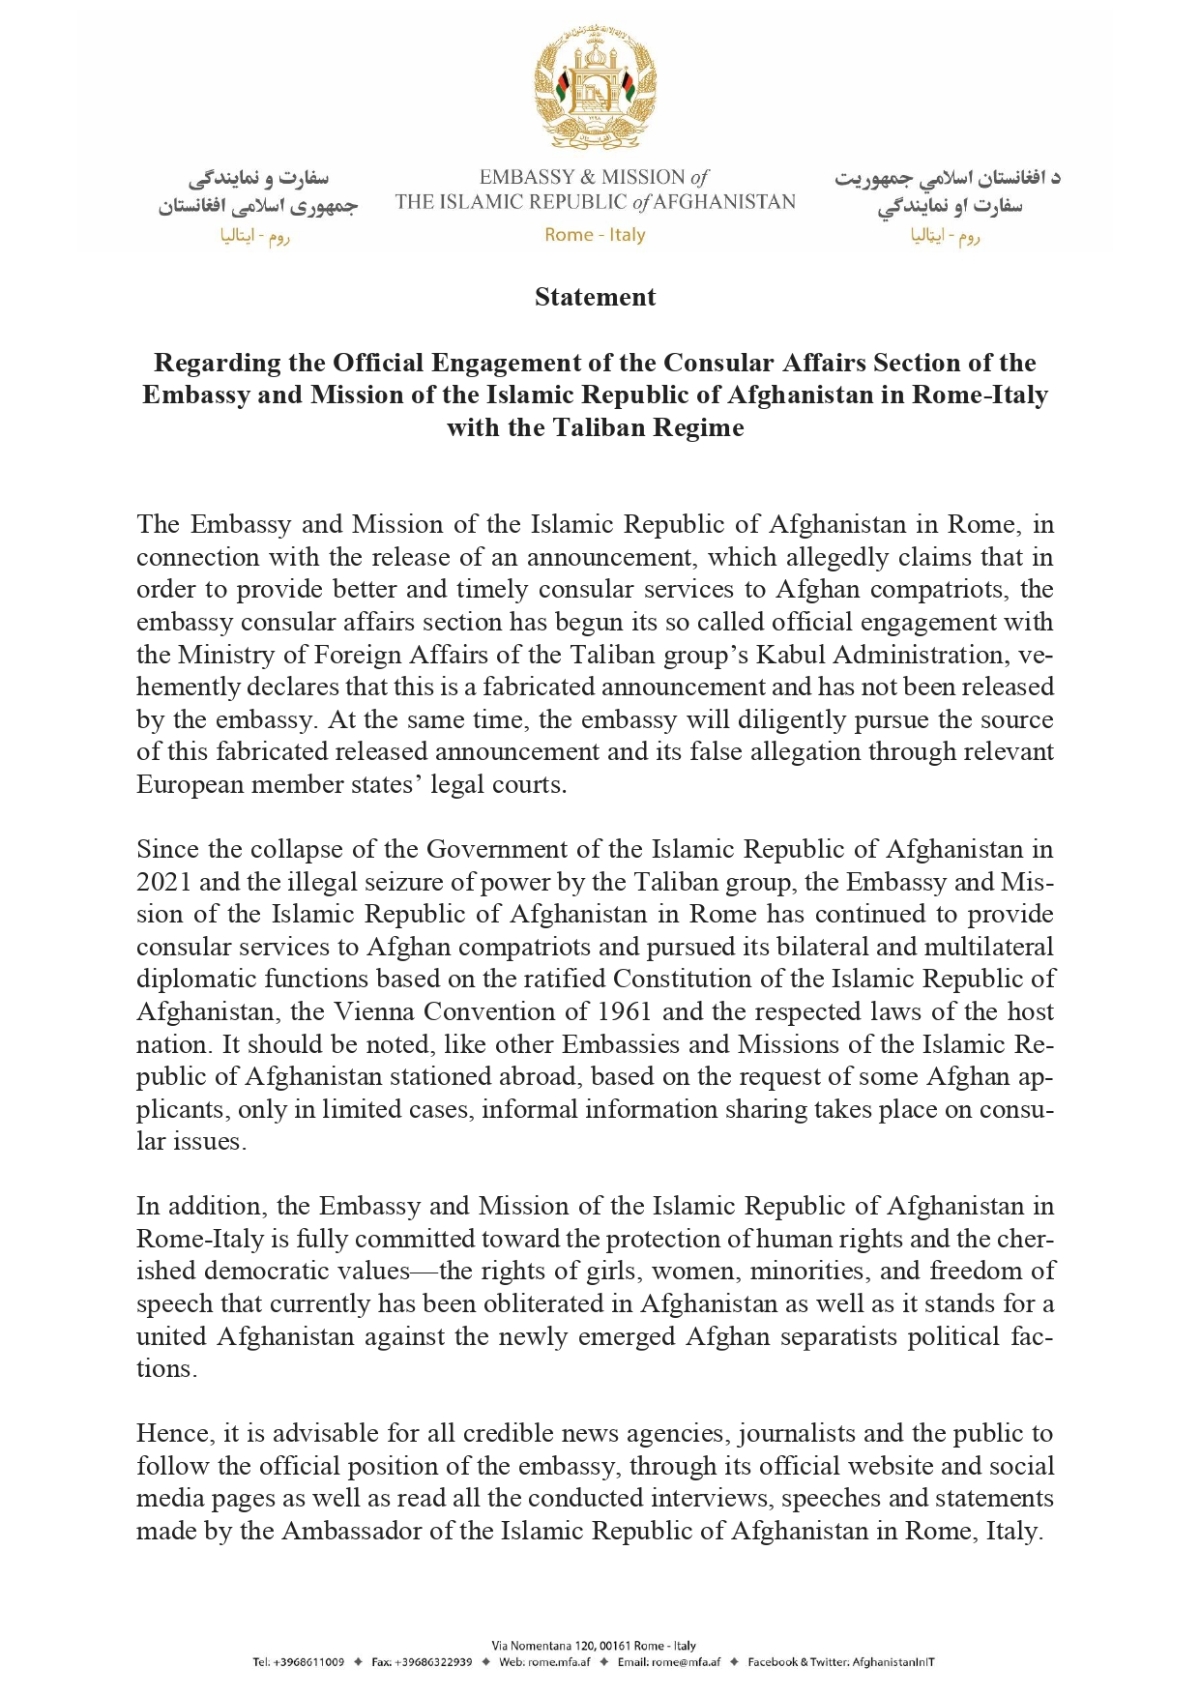 Statement Regarding the Official Engagement of the Consular Affairs Section of the Embassy and Mission of the Islamic Republic of Afghanistan in Rome-Italy with the Taliban Regime